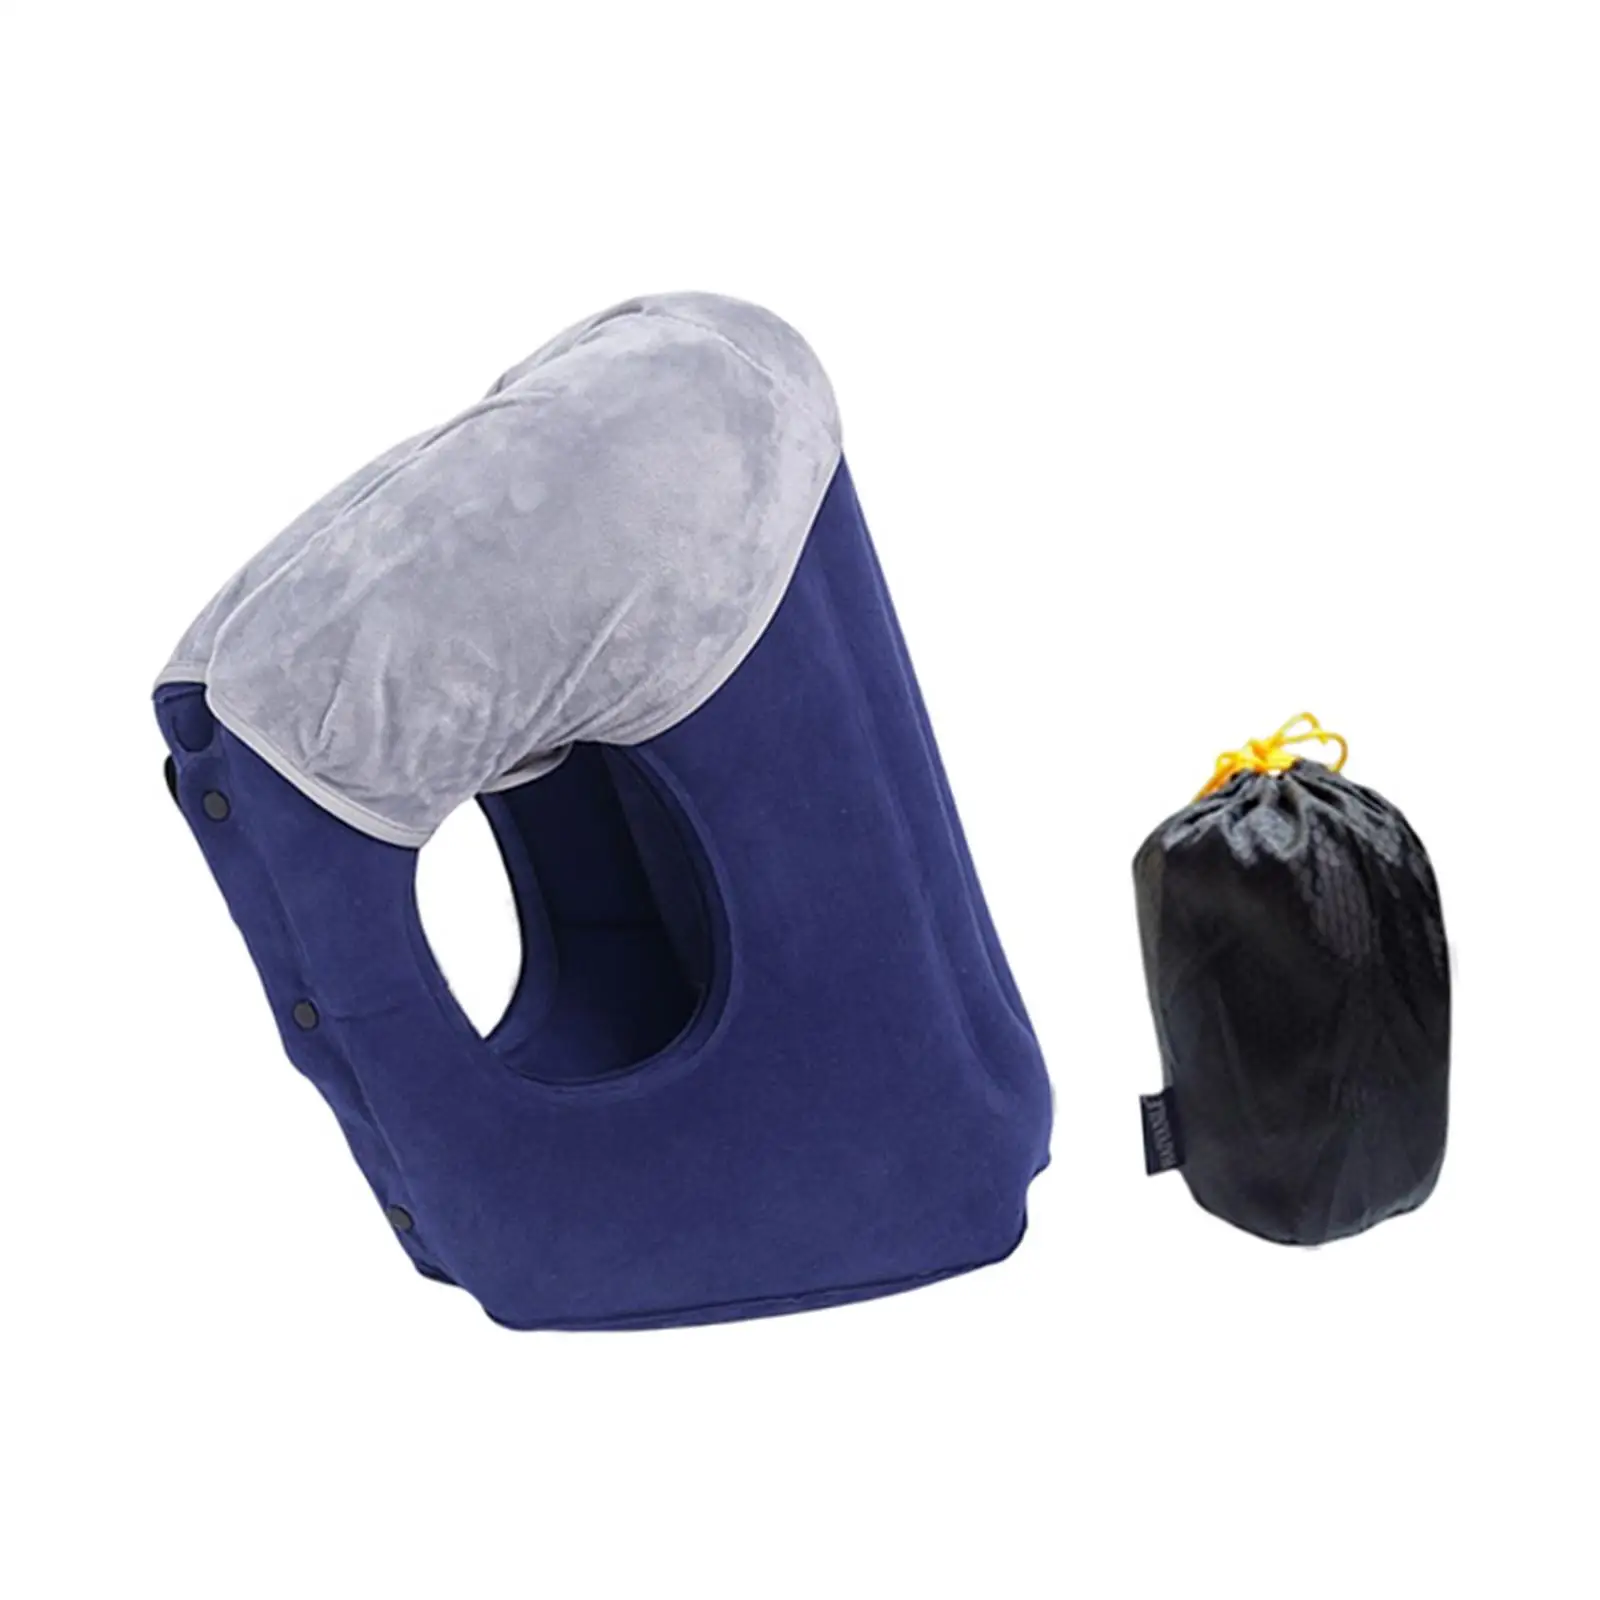 Folding Inflatable Air Pillow with Drawstring Bag Headrest Inflatable Travel Pillow for Train Plane Bus